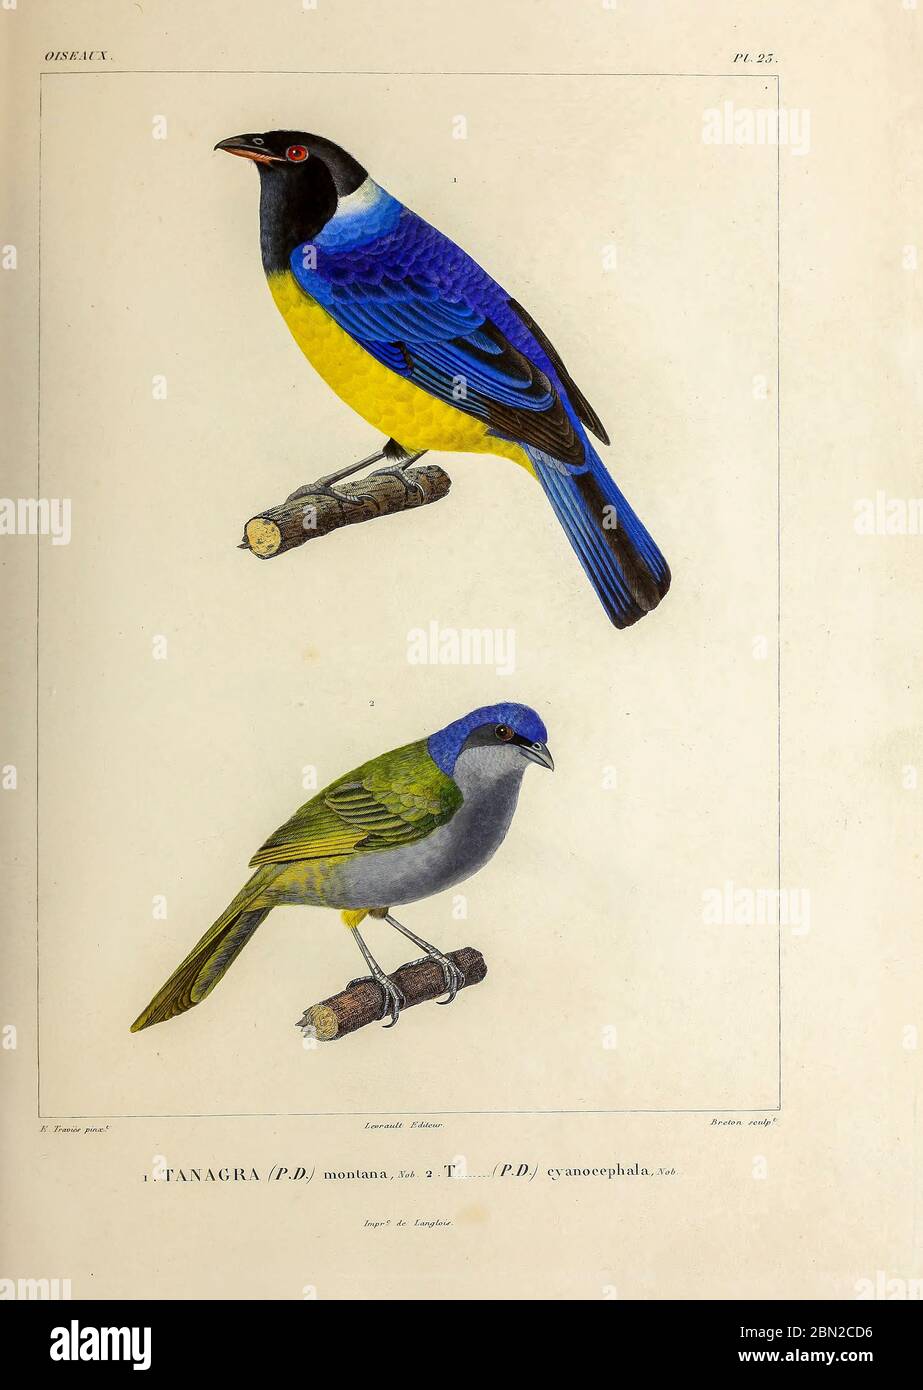 hand coloured sketch Top: hooded mountain tanager (Buthraupis montana) [Here as Tanagra montana]) Bottom: red-necked tanager (Tangara cyanocephala [Here as Tanagra cyanocephala]) From the book 'Voyage dans l'Amérique Méridionale' [Journey to South America: (Brazil, the eastern republic of Uruguay, the Argentine Republic, Patagonia, the republic of Chile, the republic of Bolivia, the republic of Peru), executed during the years 1826 - 1833] 4th volume Part 3 By: Orbigny, Alcide Dessalines d', d'Orbigny, 1802-1857; Montagne, Jean François Camille, 1784-1866; Martius, Karl Friedrich Philipp von, Stock Photo